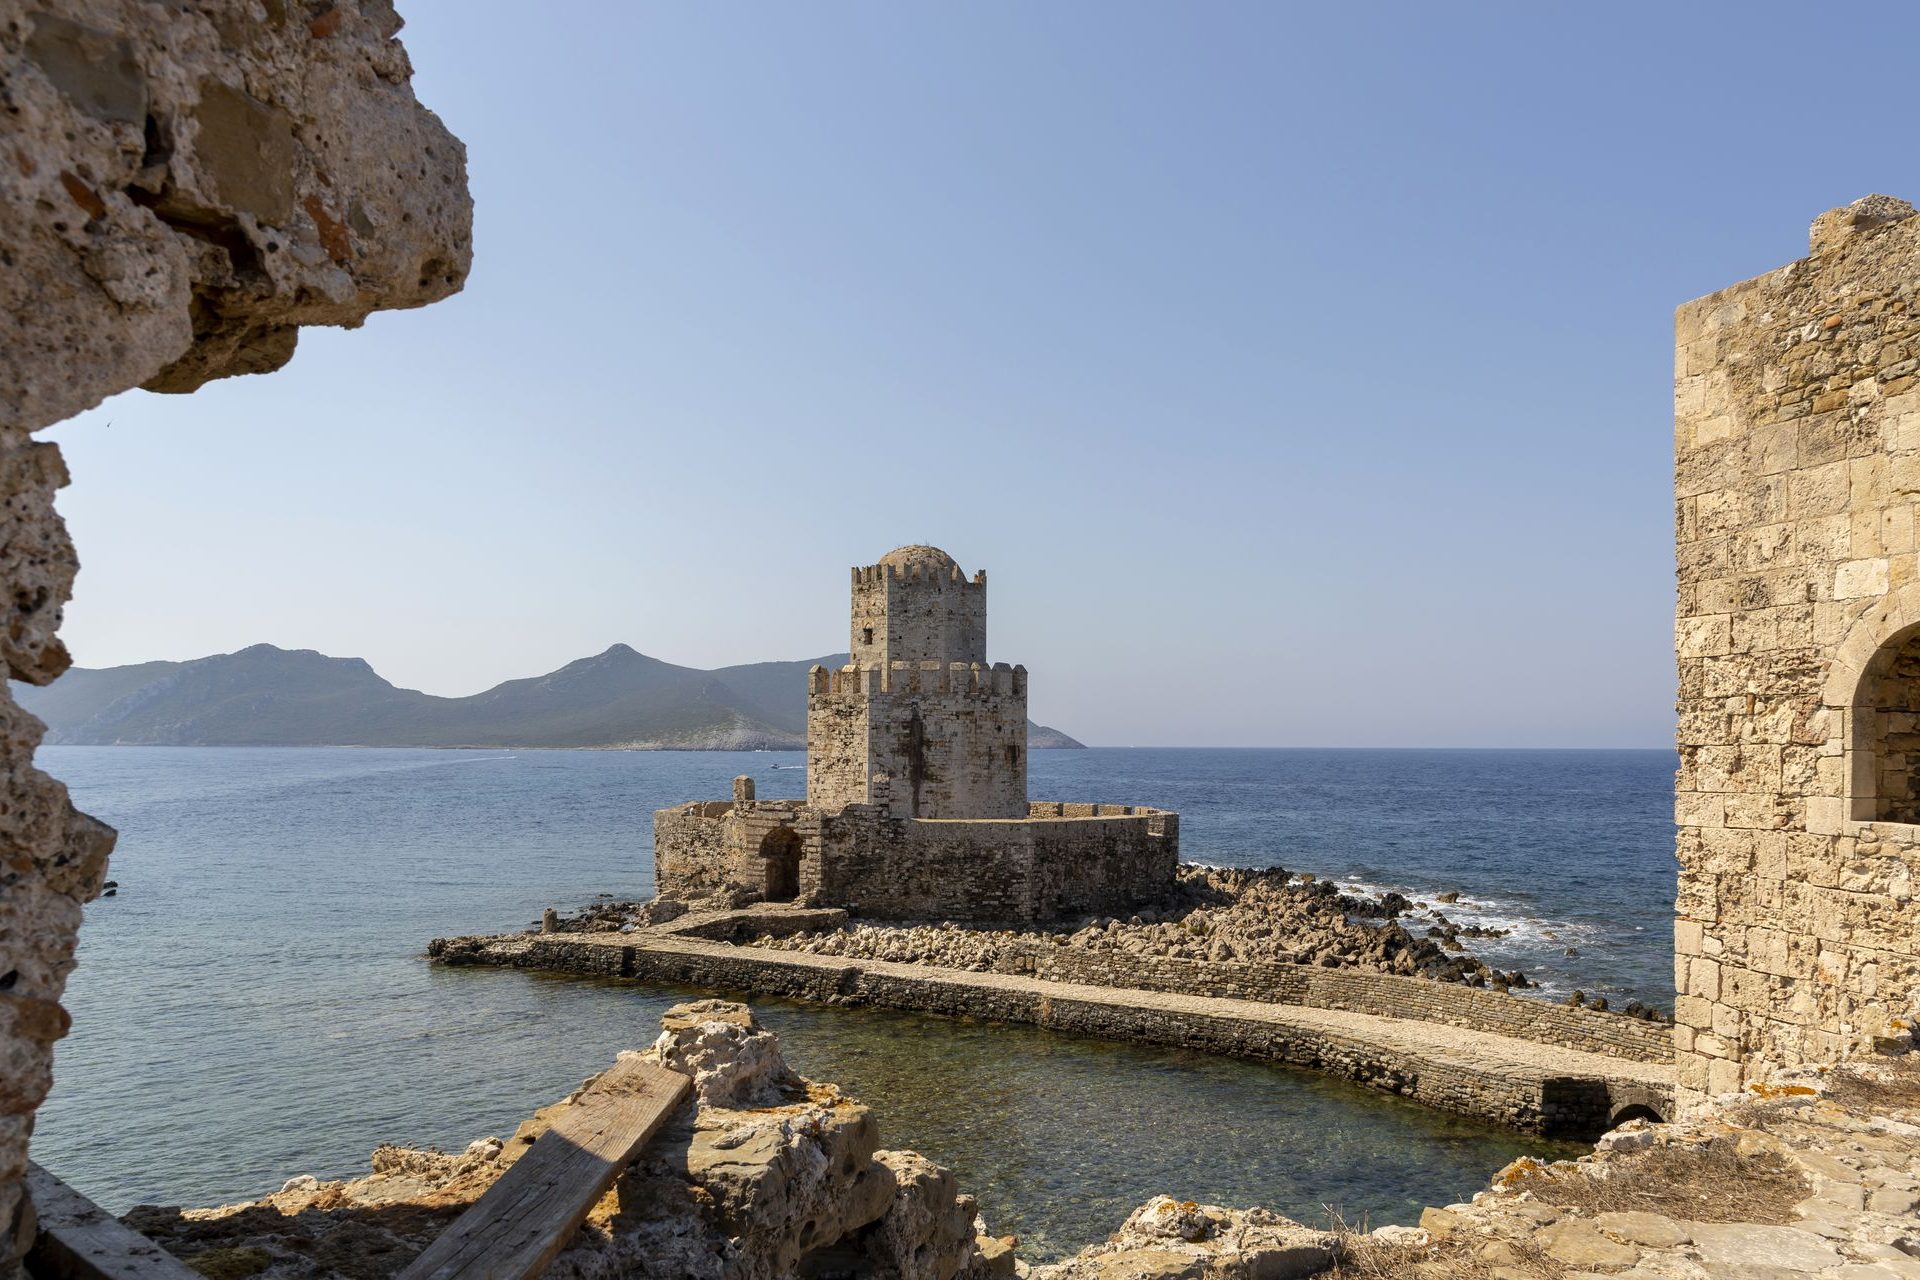 <p>Do you want to enjoy sunsets on magnificent beaches, swim in the Mediterranean, and discover ancient masterpieces? Greece is reaching out to you for an unforgettable trip. Let's take a look at the 20 must-see places in this uniquely charming country.</p> <p><a href="https://www.msn.com/en-us/channel/source/Showbizz%20Daily%20English/sr-vid-w8hcuhvu3f8qr5wn5rk8xhsu5x8irqrgtxcypg4uxvn7tq9vkkfa?cvid=cddbc5c4fc9748a196a59c4cb5f3d12a&ei=7" rel="noopener">Follow Showbizz Daily to stay informed and enjoy more content!</a></p>